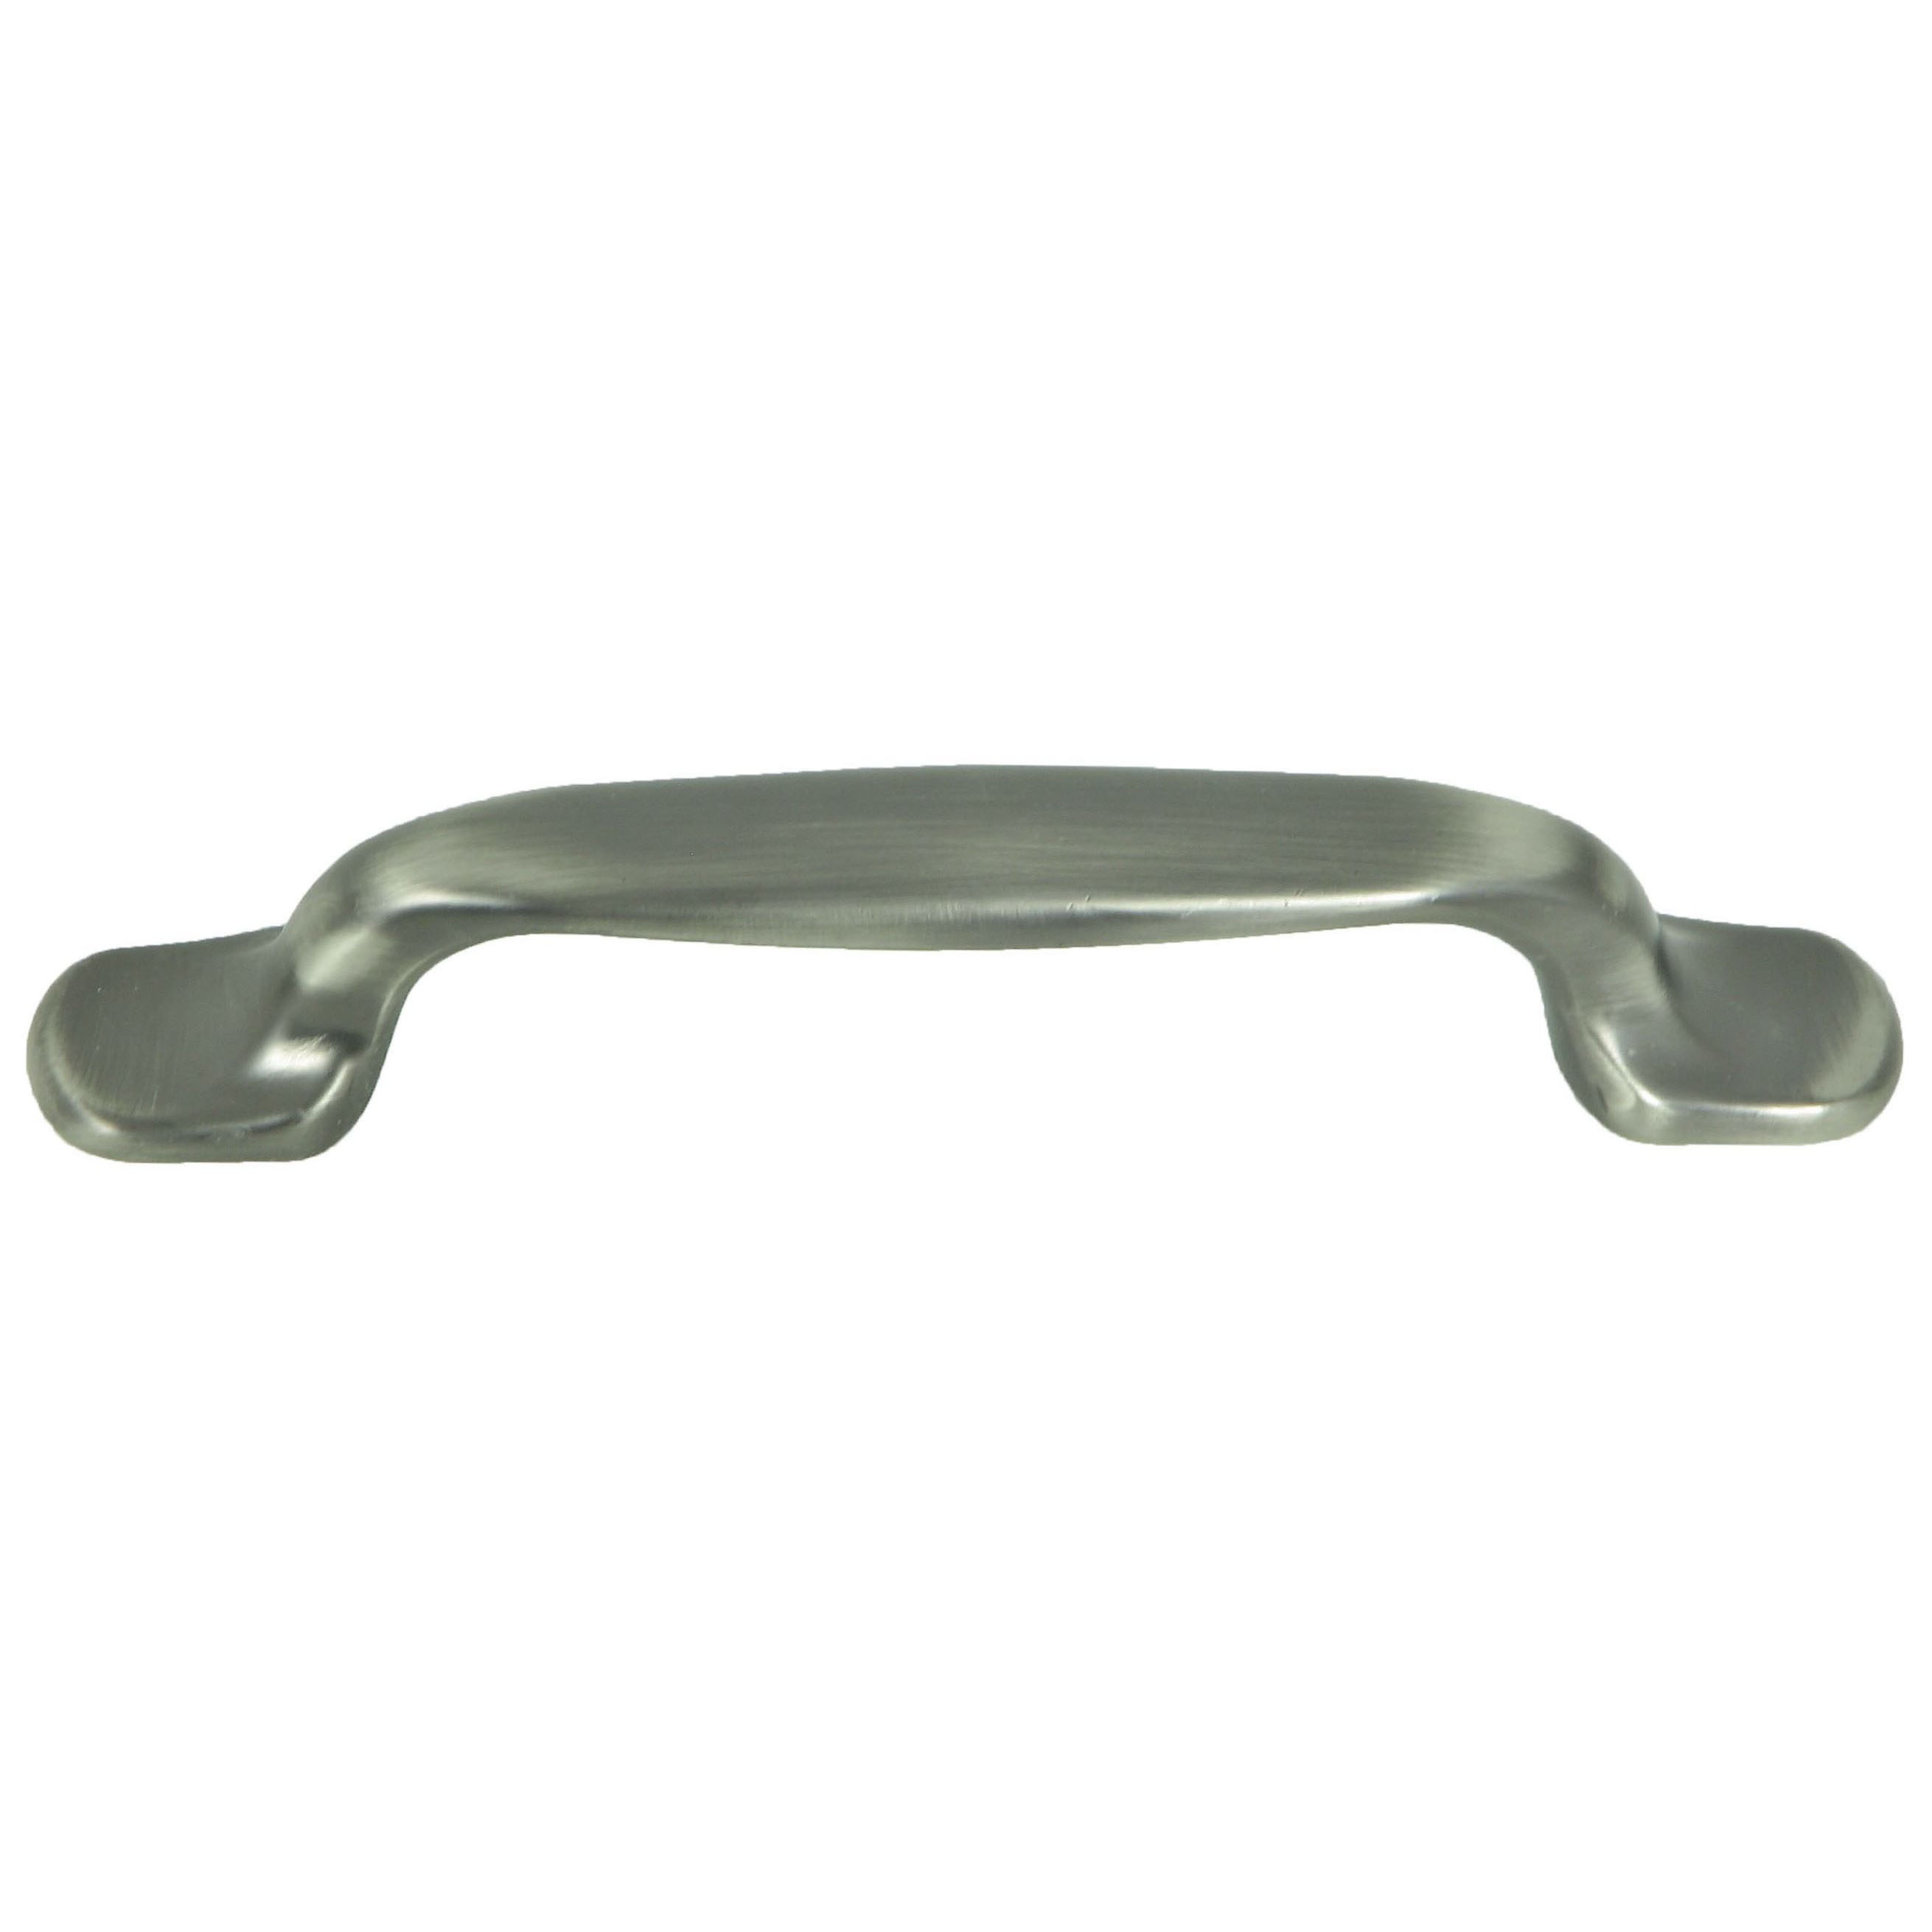 Marshall Cabinet Pull in Weathered Nickel 1 pc